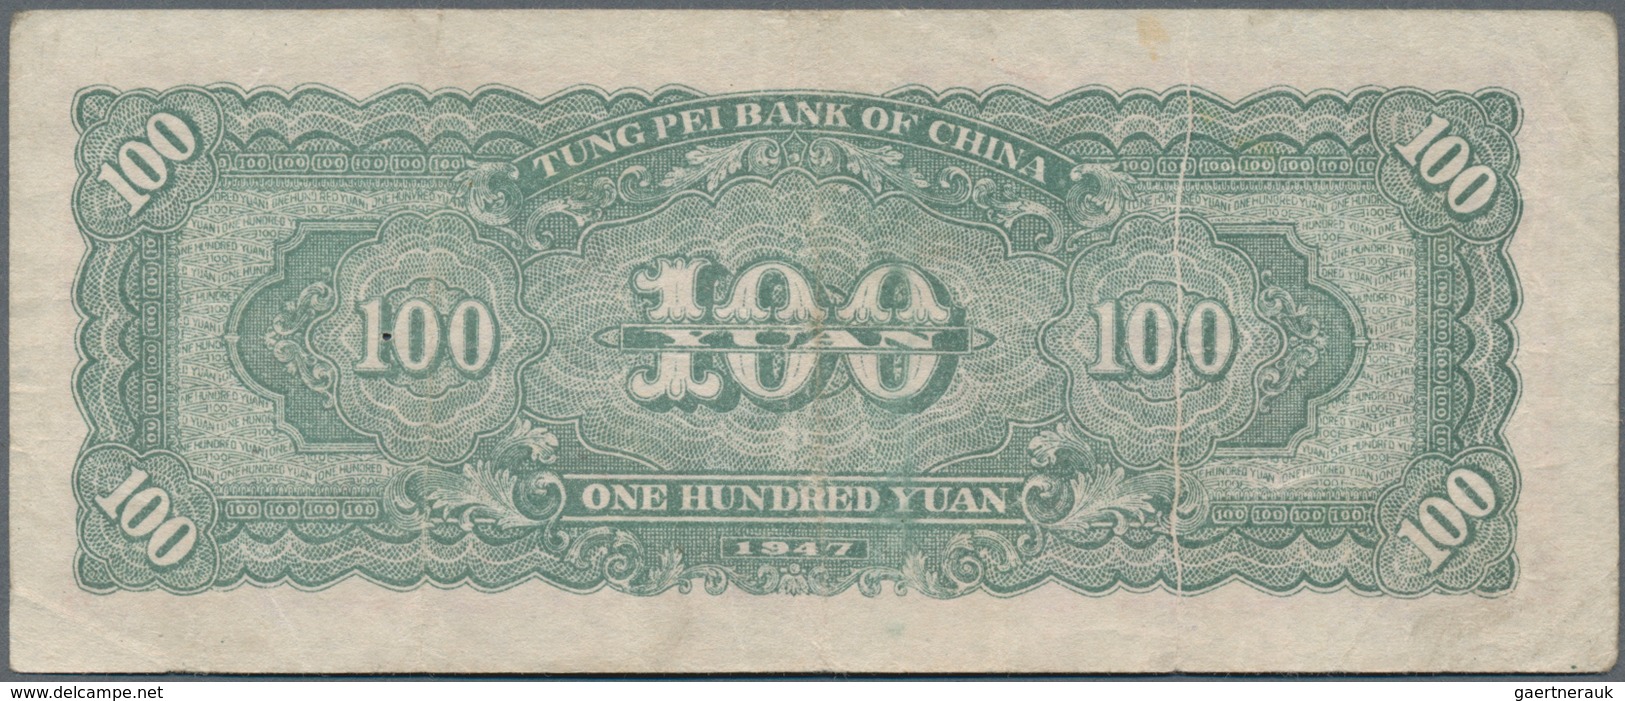 China: The Communist Tung Pei Bank Of China 100 Yuan 1947 P. S3748, A Bit Stronger Used, Faded Color - China